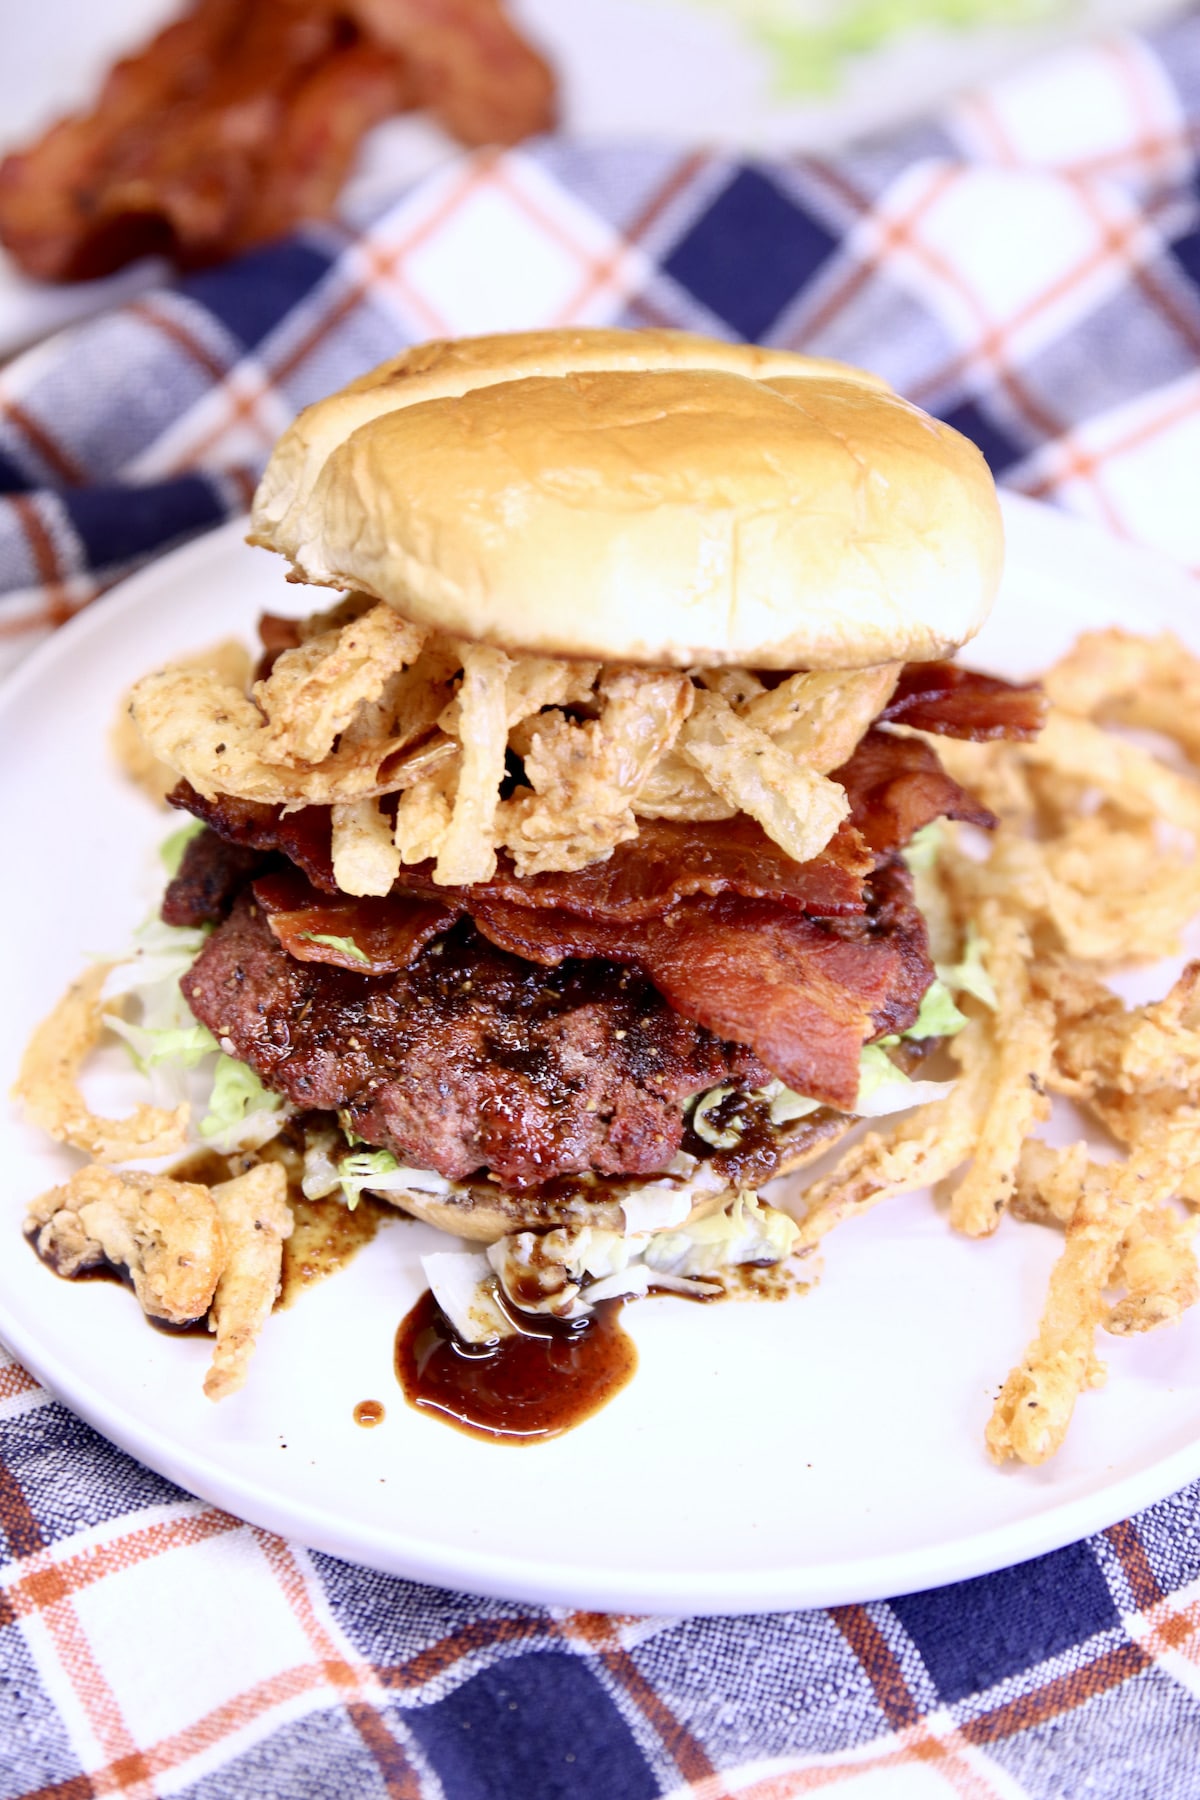 Burger with bacon and onion strings on a bun.